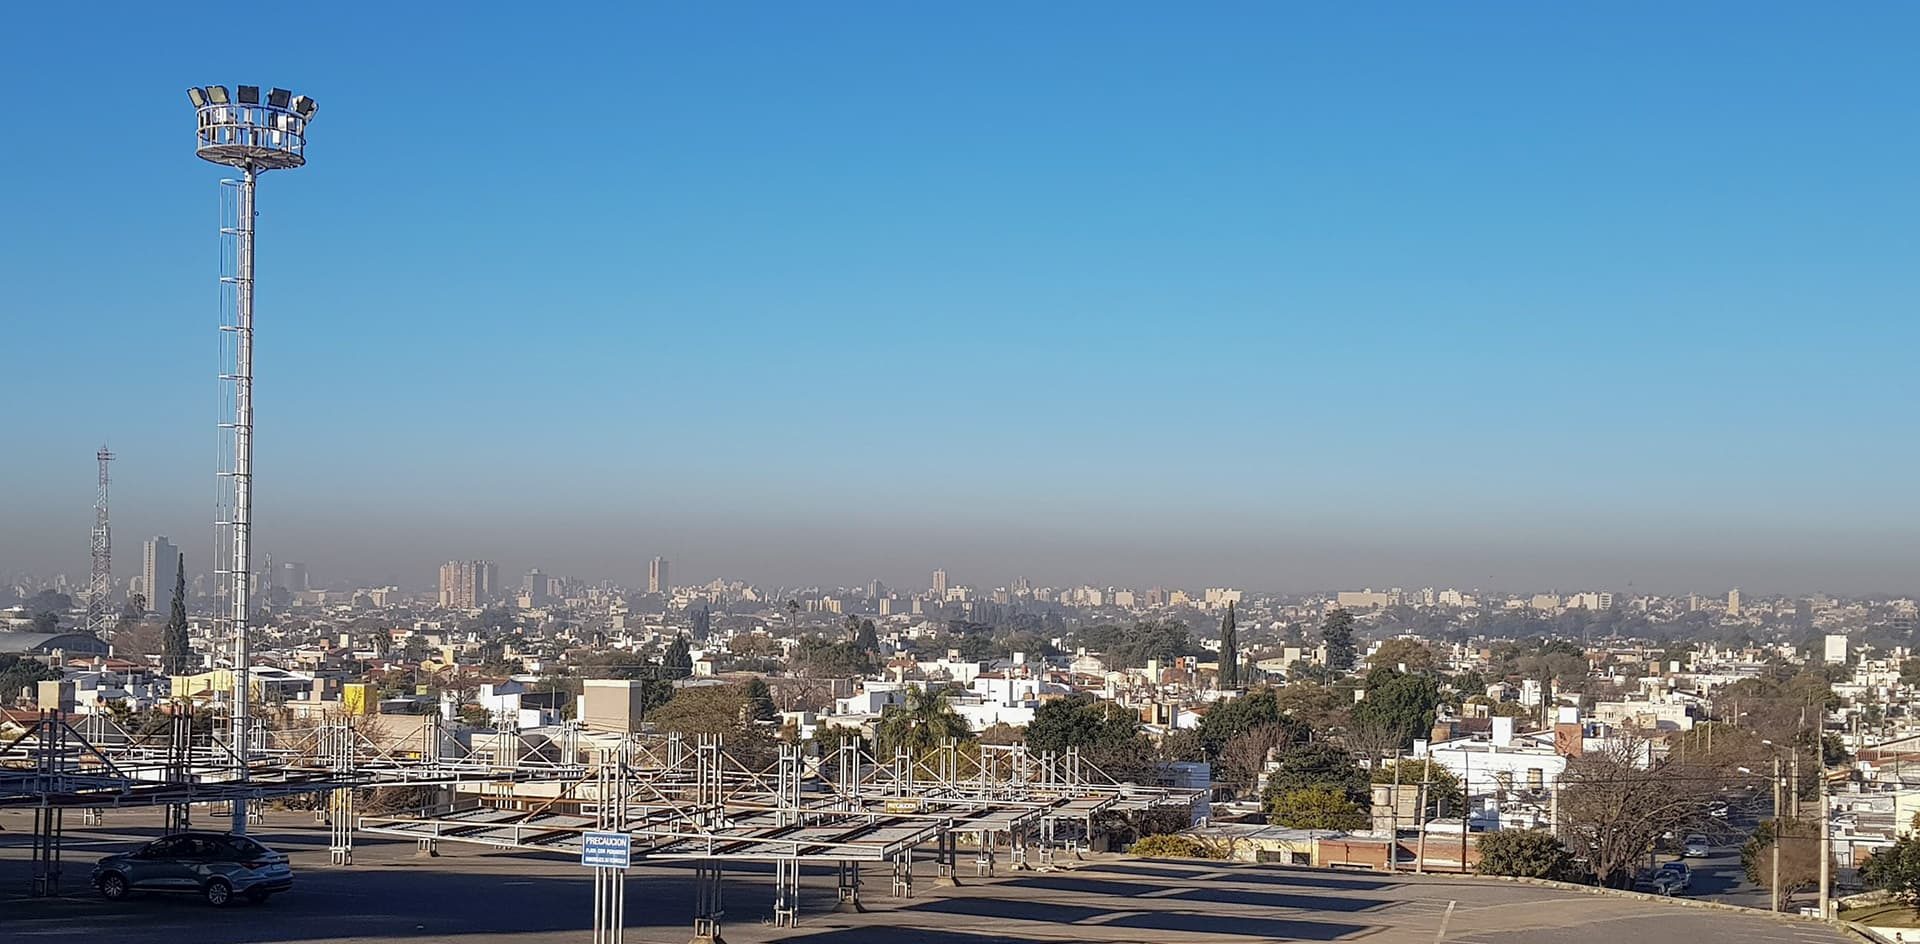 Cordoba Air Pollution: The air is acceptable, but not always or in all areas